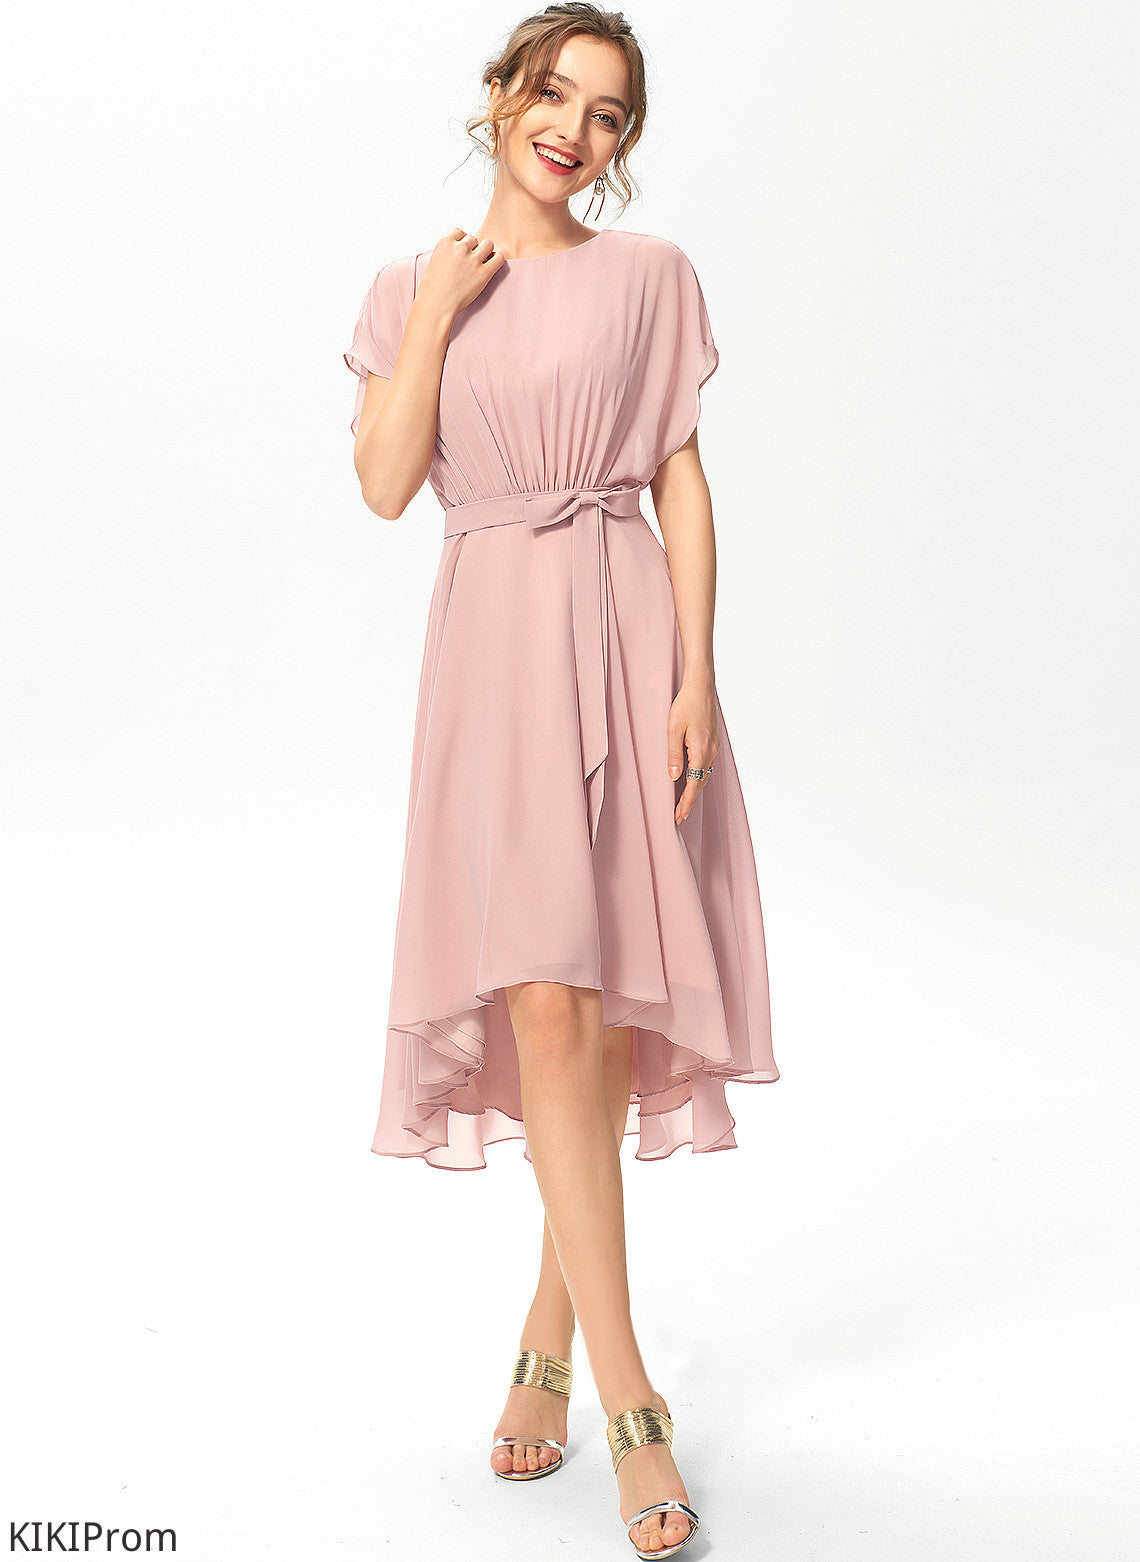 Cocktail Dresses With Cocktail Ruffle Dress Neck A-Line Scoop Helga Bow(s) Chiffon Asymmetrical